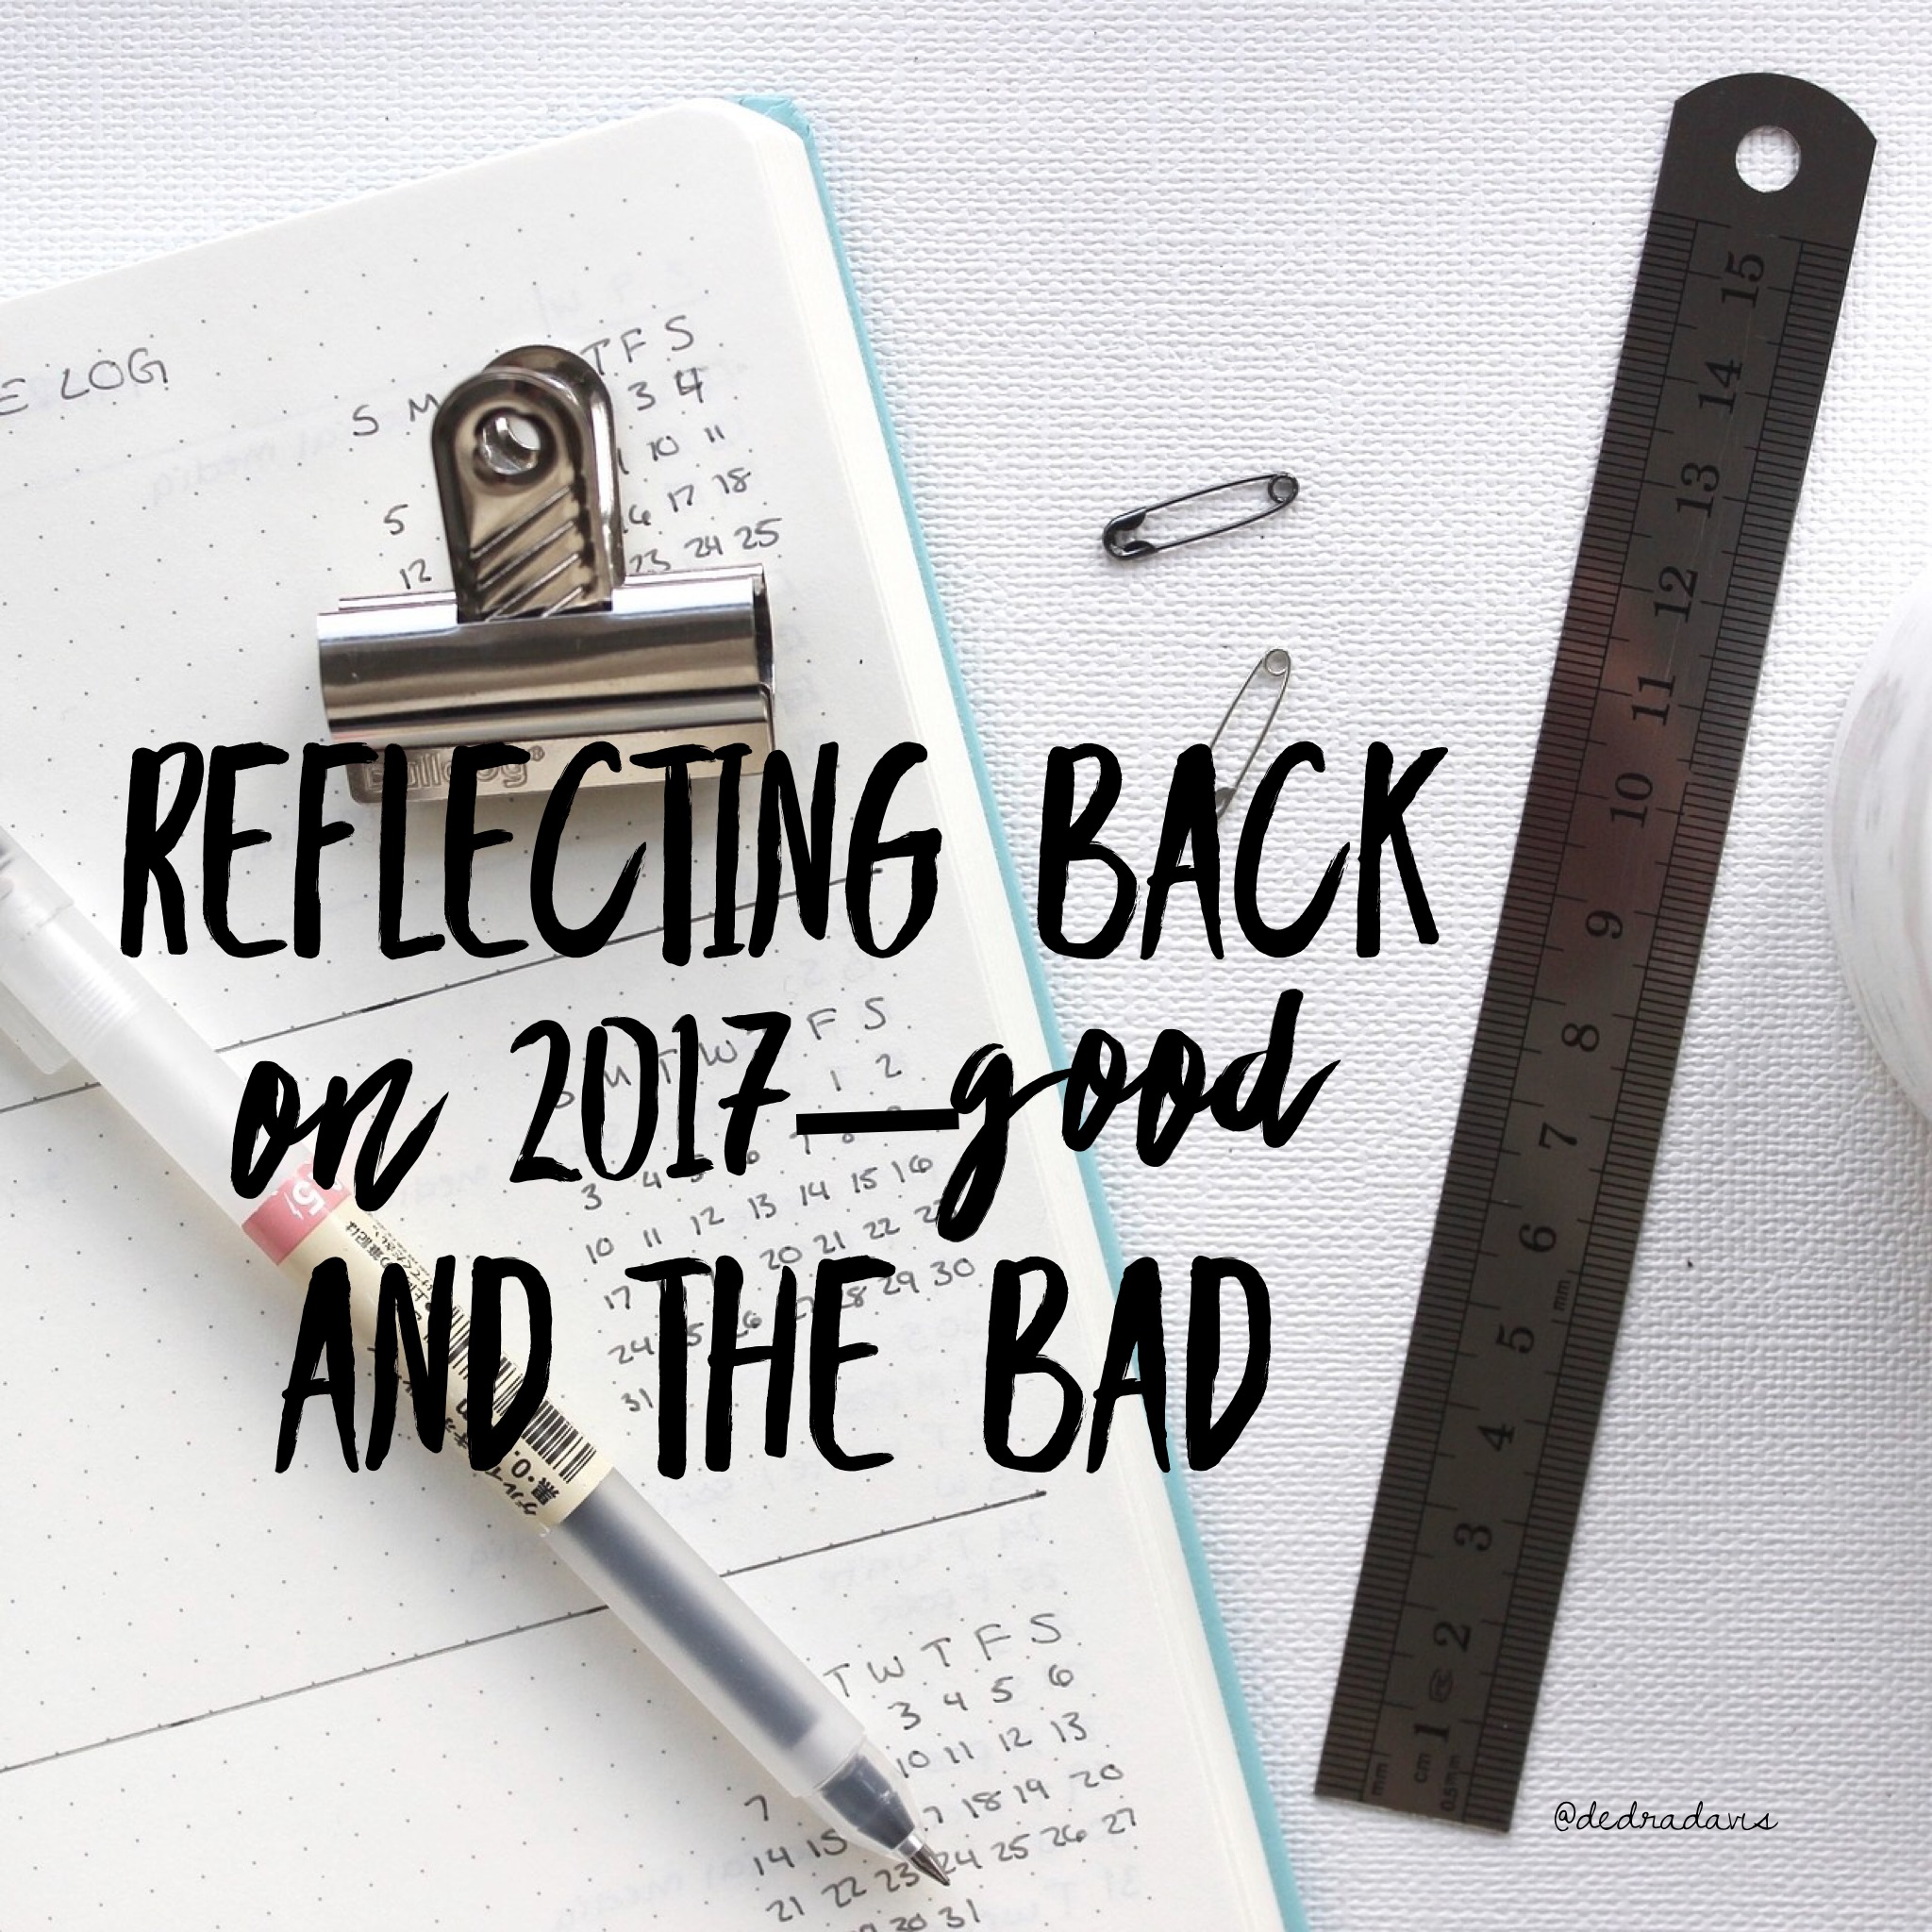 Reflecting Back On 2017--Good And The Bad